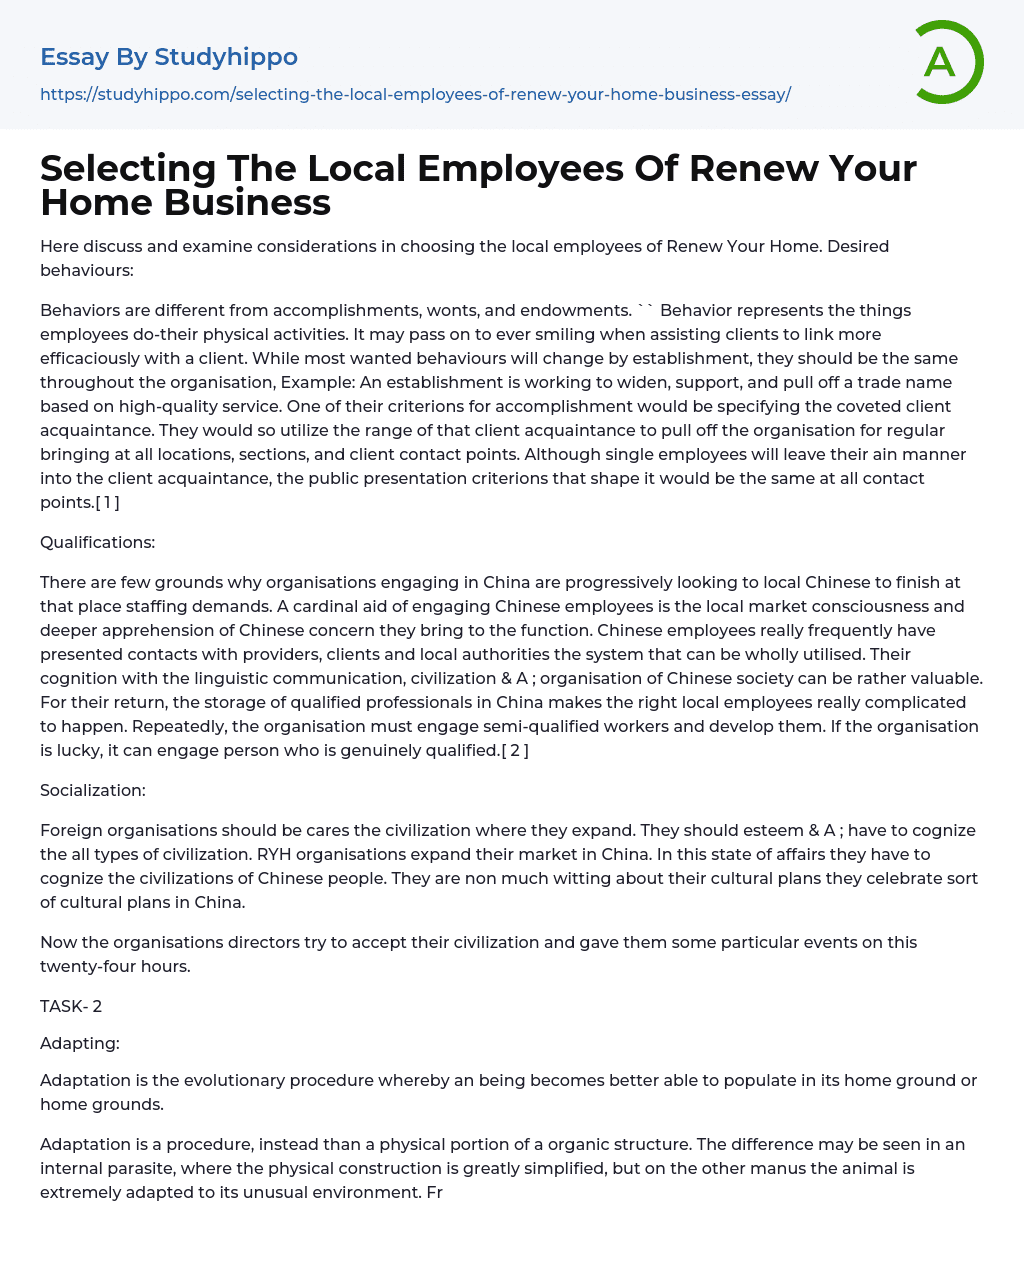 Selecting The Local Employees Of Renew Your Home Business Essay Example